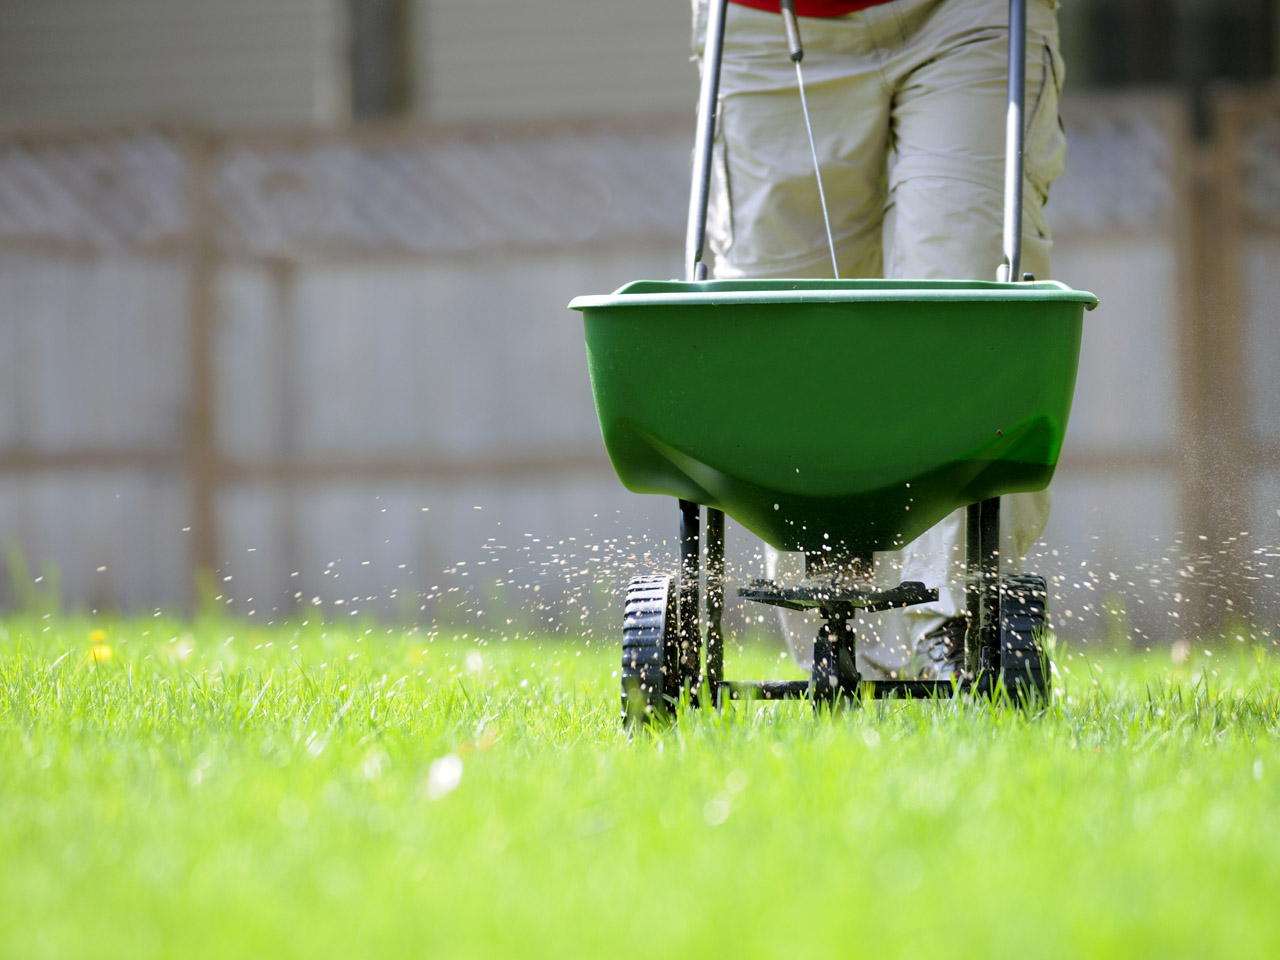 This is the most important aspect of maintaining the quality of your lawn. Fertilizing your lawn will help keep the lawn green, stimulate root growth and provide tolerance during times of draught. We will tailor a fertilizing plan that best fits the needs of your lawn.